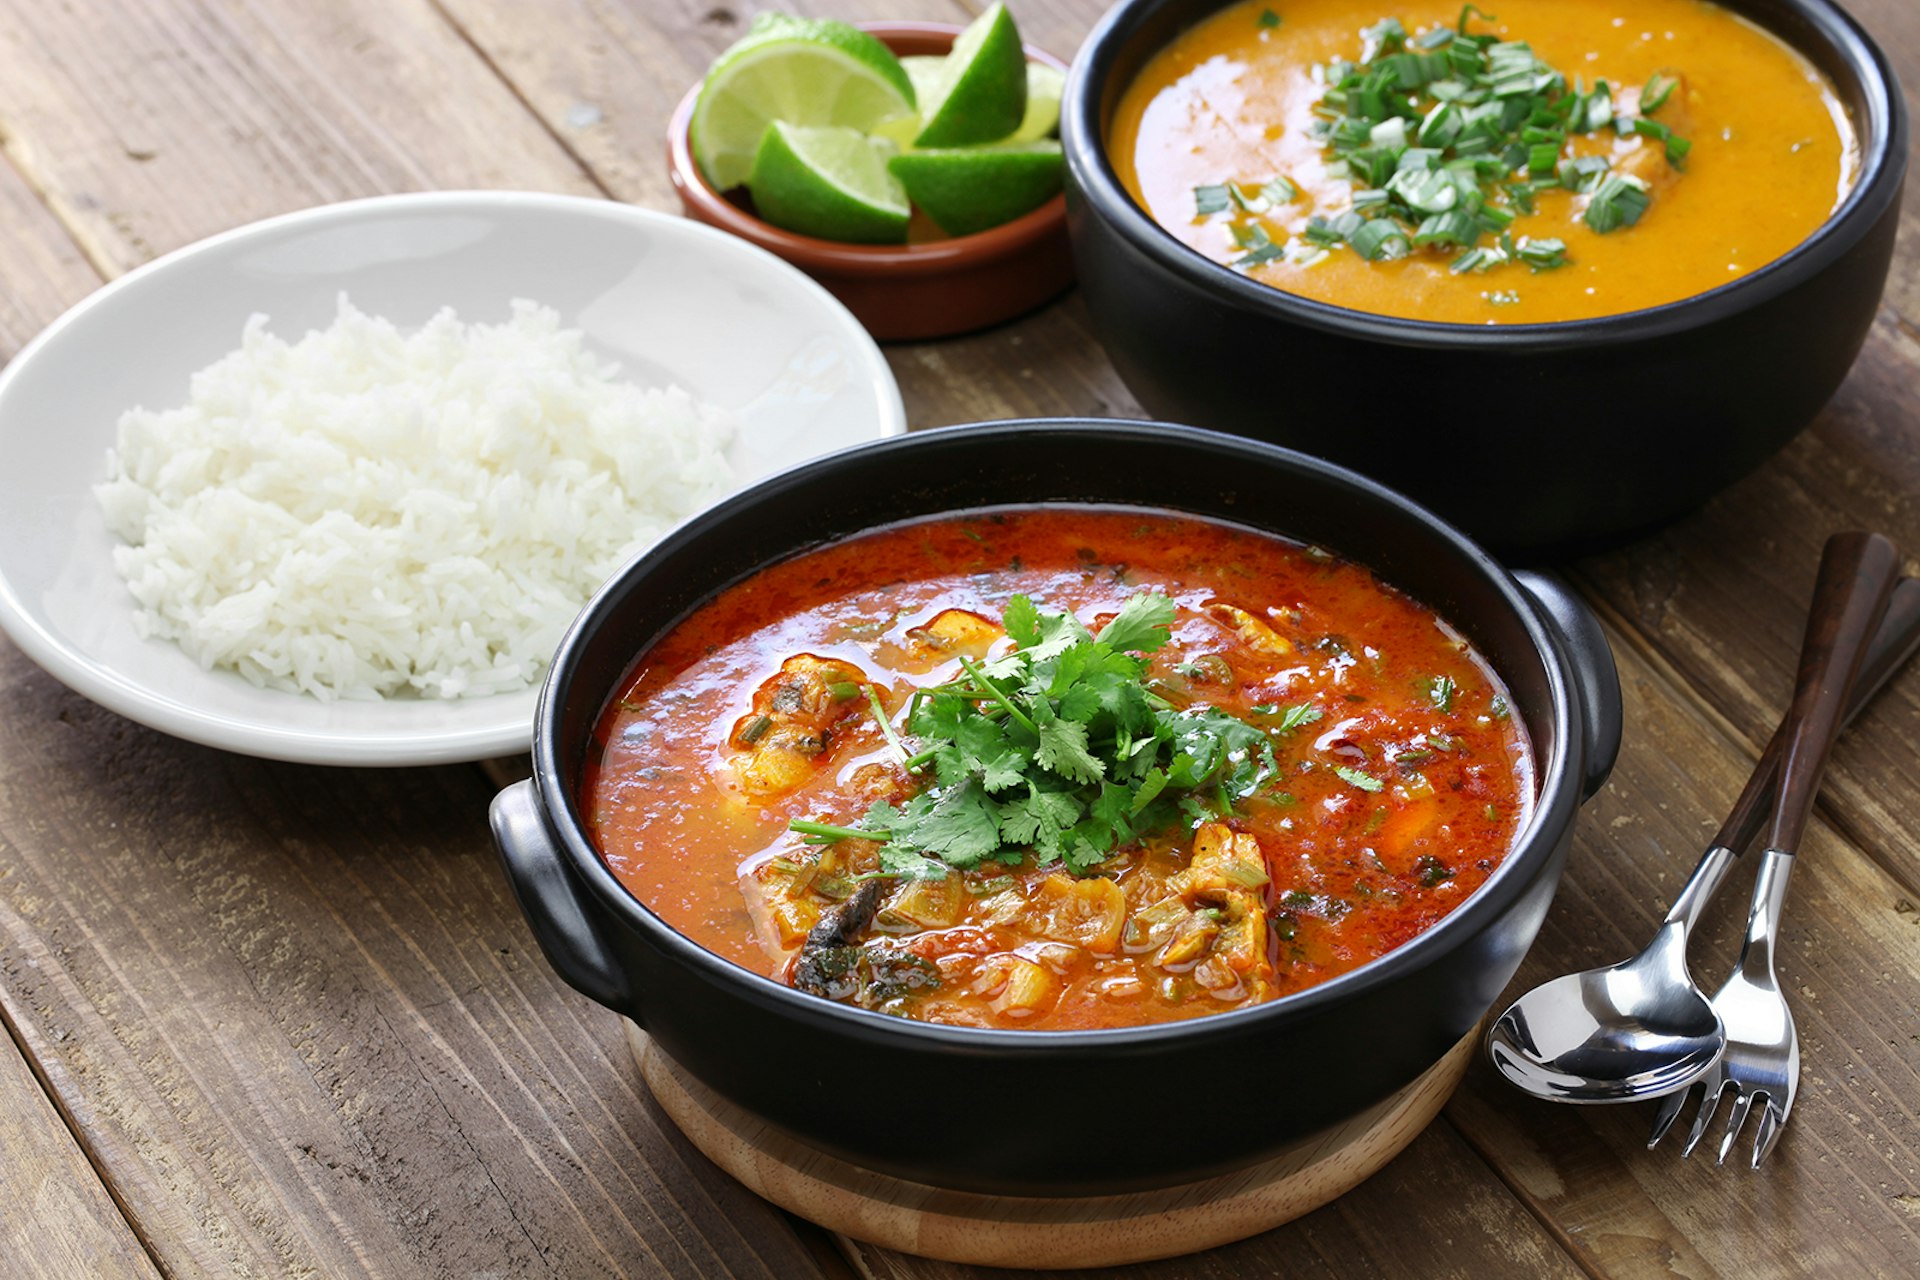 A bowl of red stew topped with cilantro sits on a wooden table alongside a plate of rice and a bowl of creamy orange soup. South America.